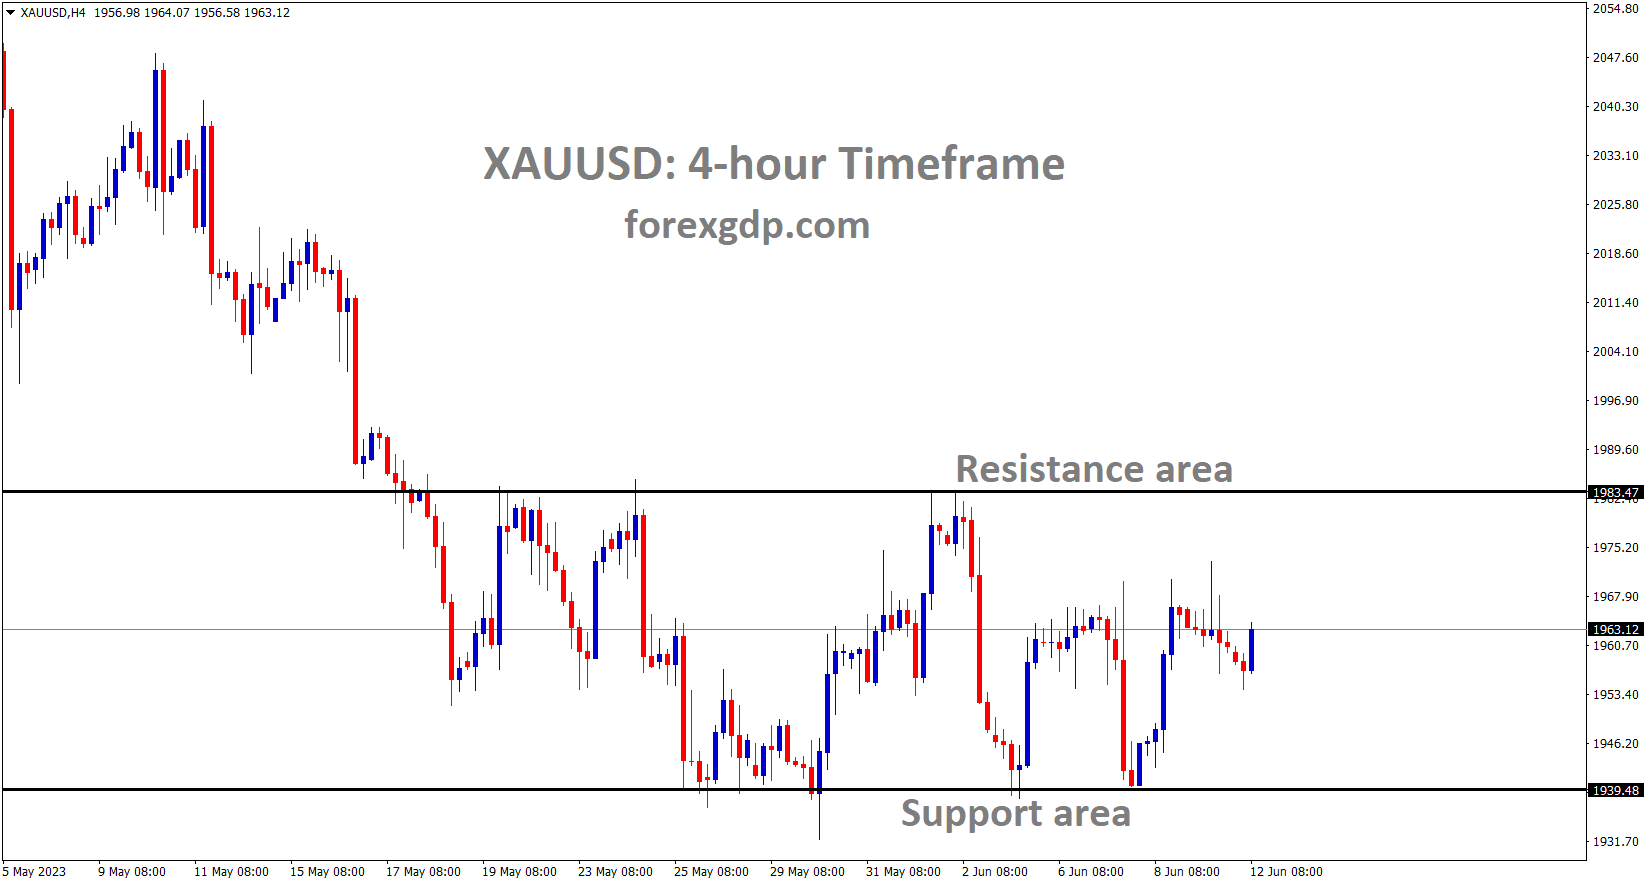 XAUUSD Gold price is moving in the Box pattern and the market has rebounded from the Horizontal support area of the pattern.